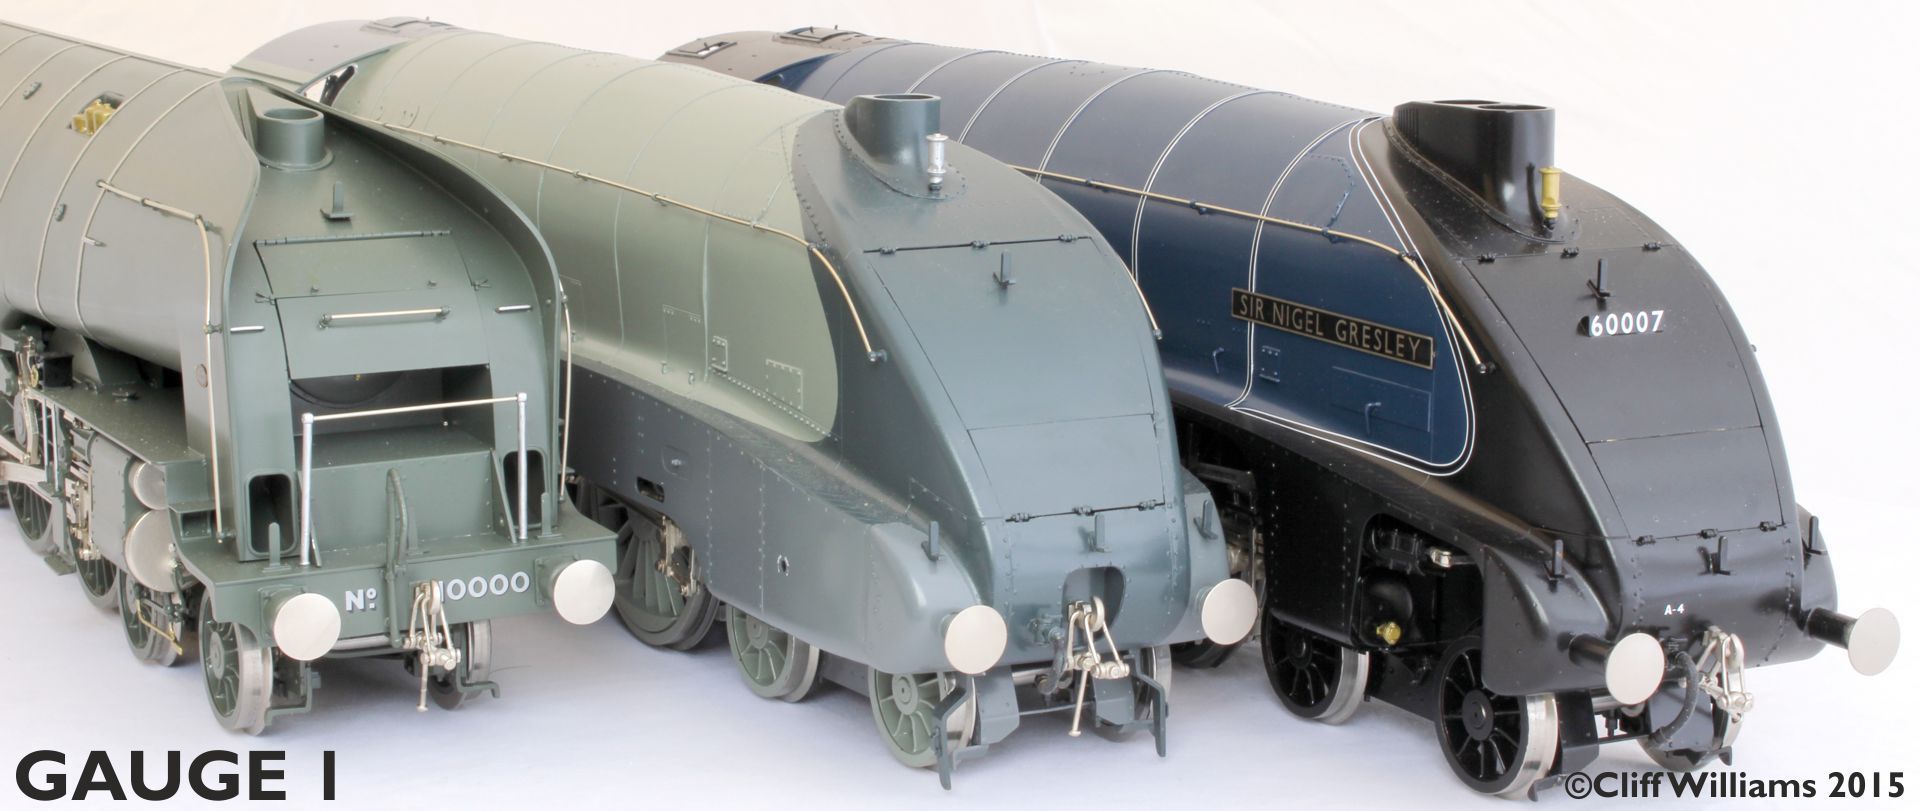 Find out more about our Gauge 1 locos available from stock here in the UK.